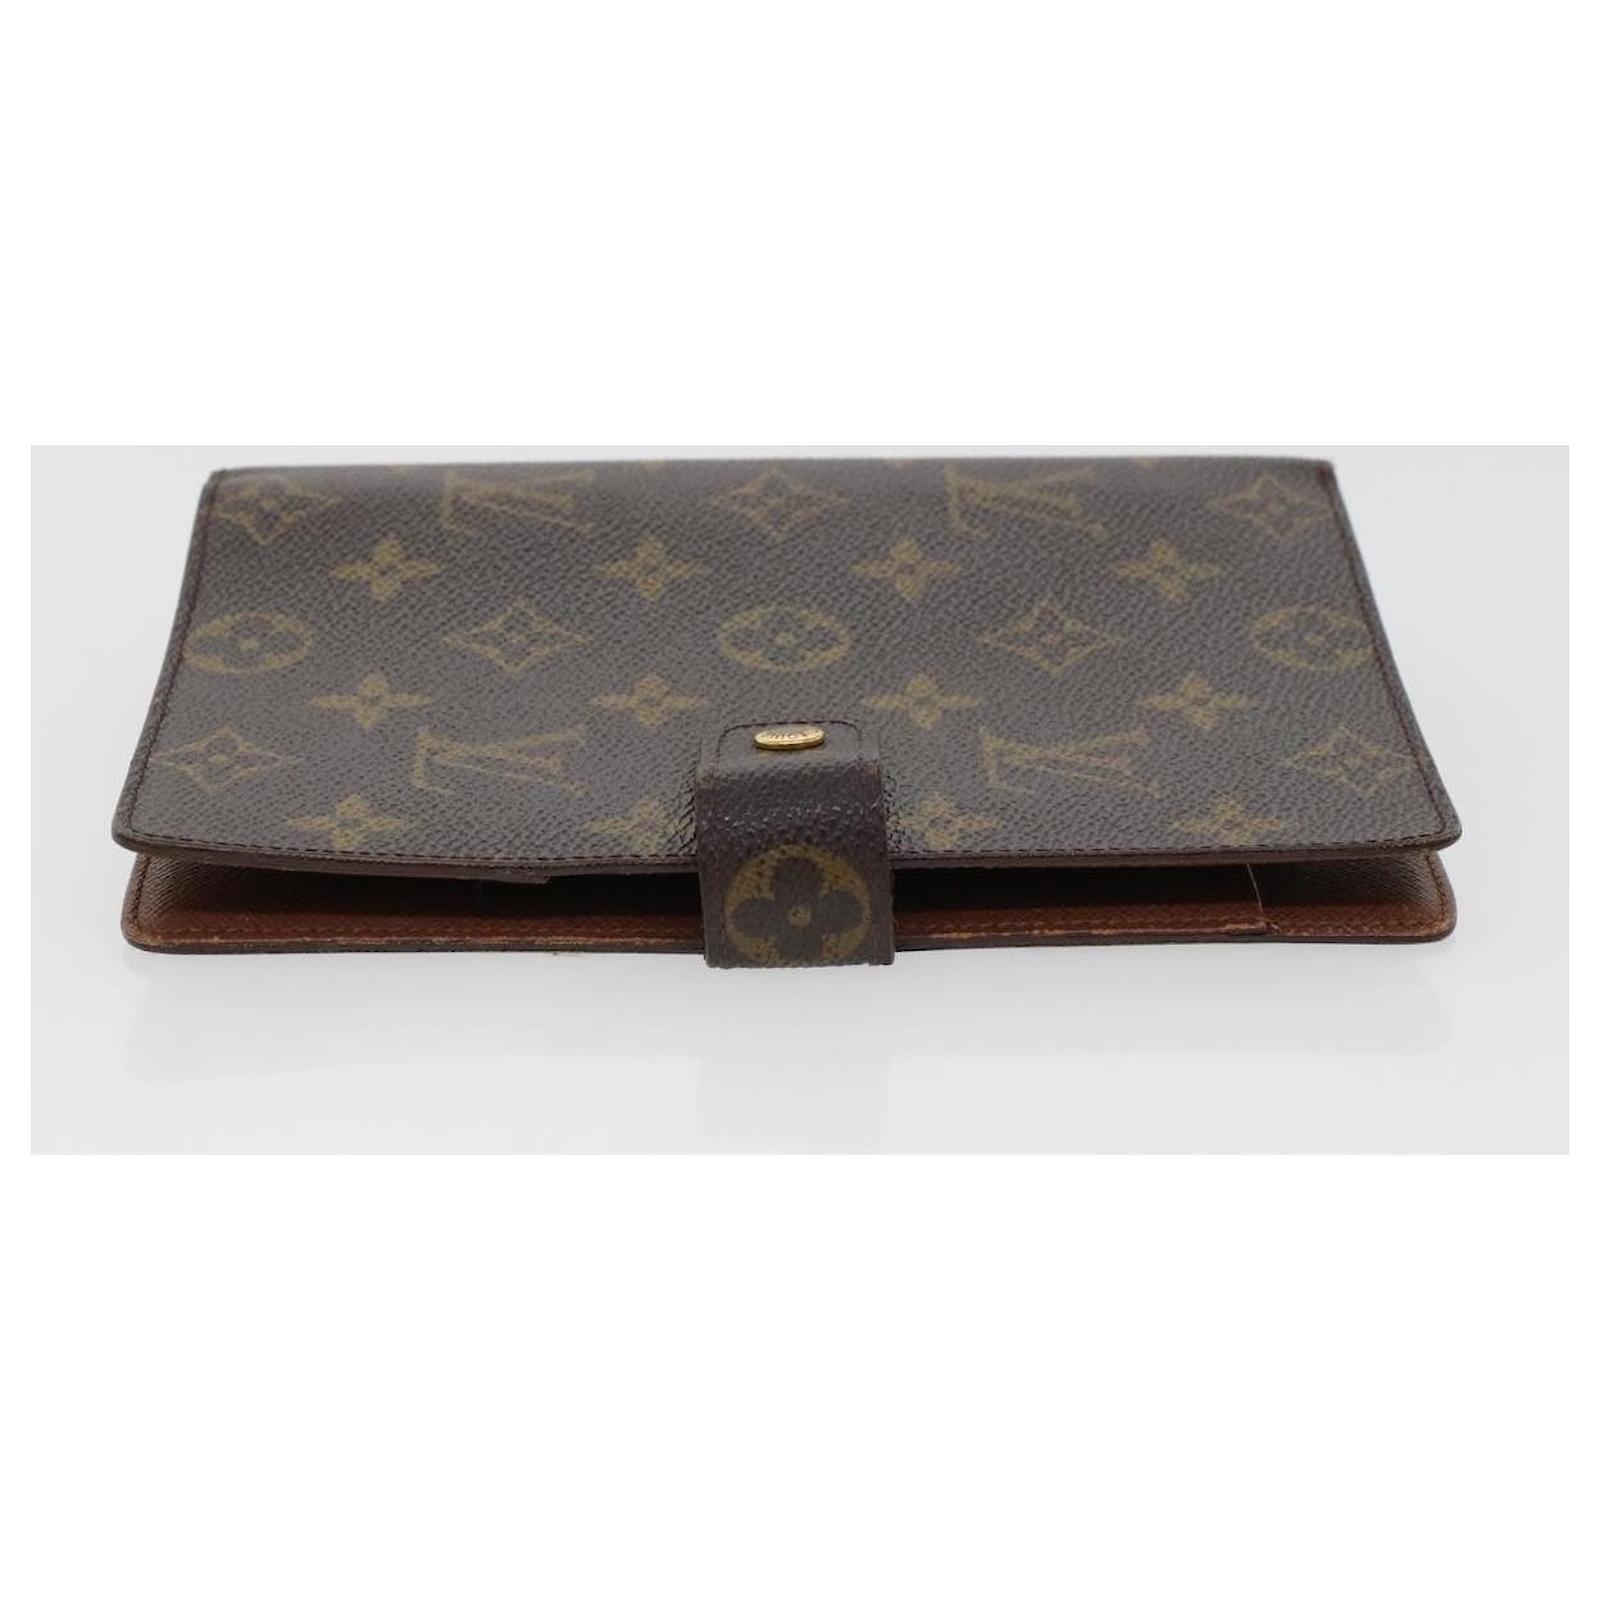 LOUIS VUITTON Ring Agenda Cover Large Damier Ebene Cover Brown